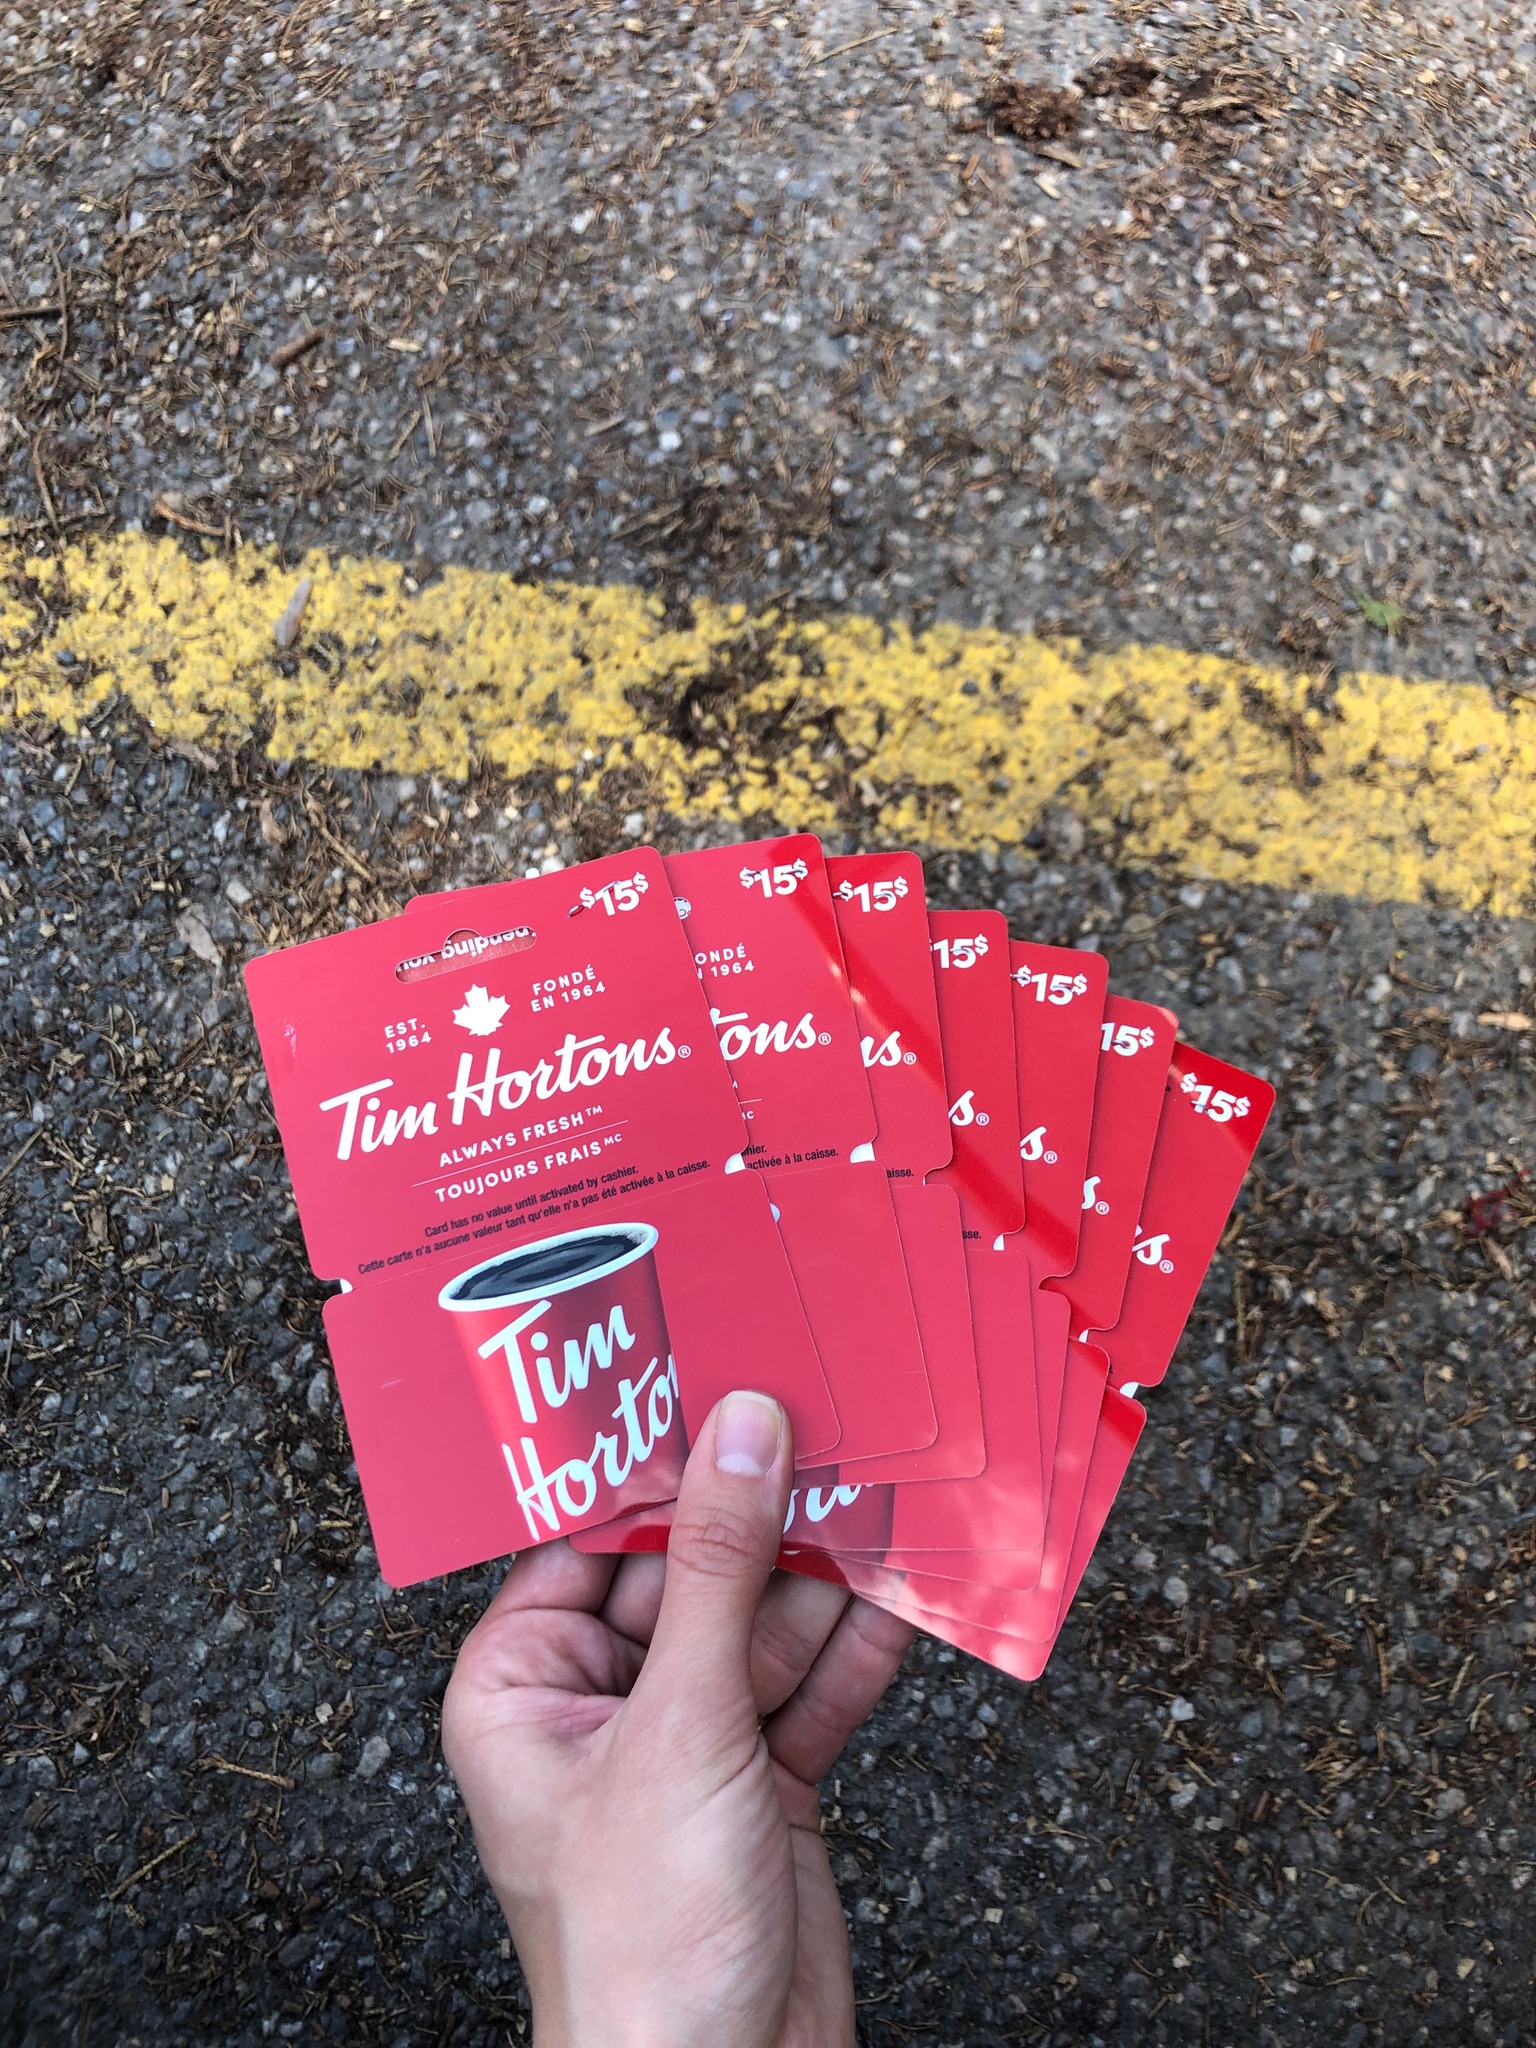 A photo of a hand holding some Tim Horton's gift cards.